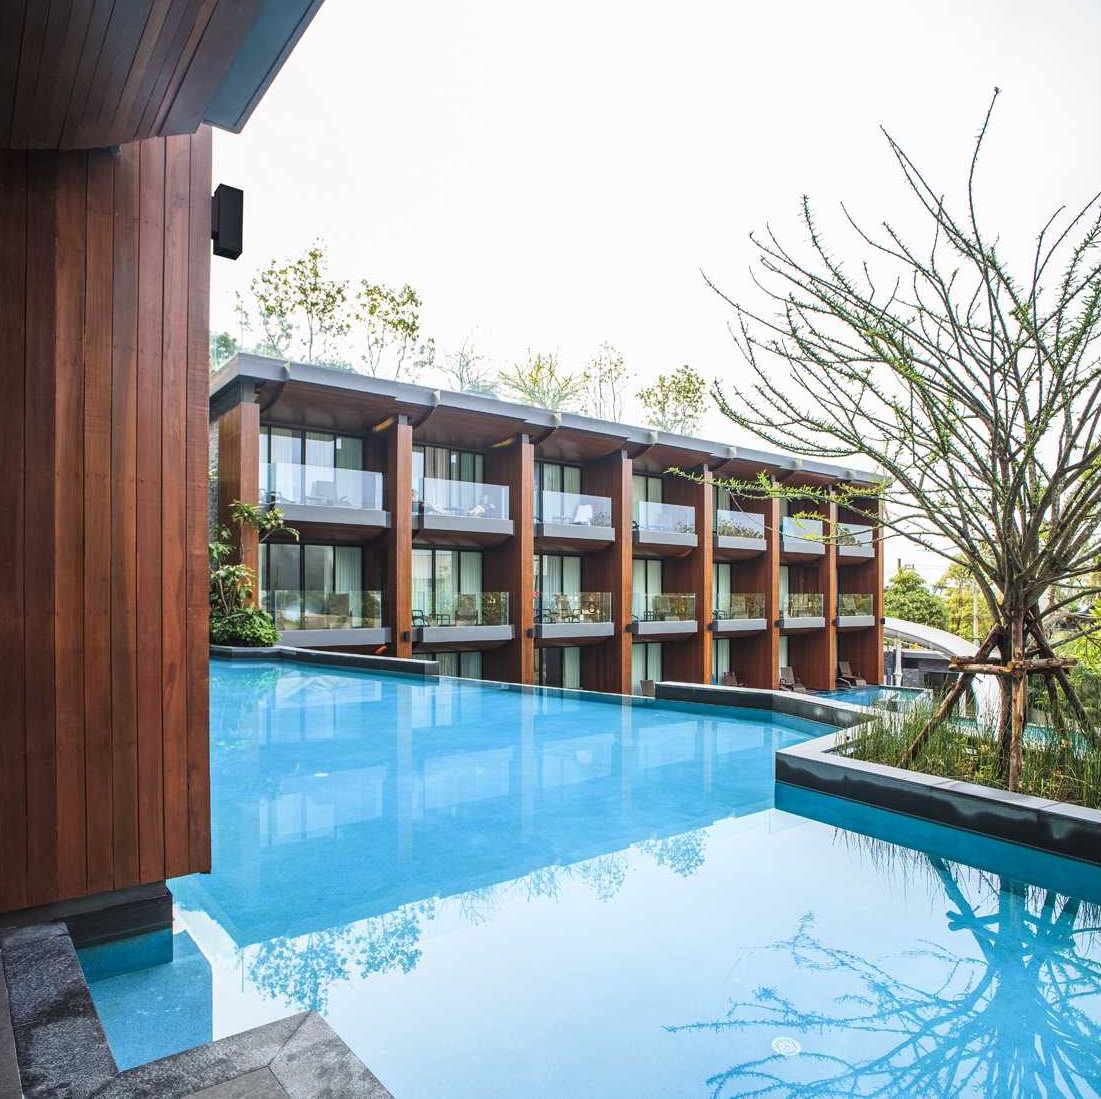 Discover the amazing Soori resort and its luxury residences in Bali